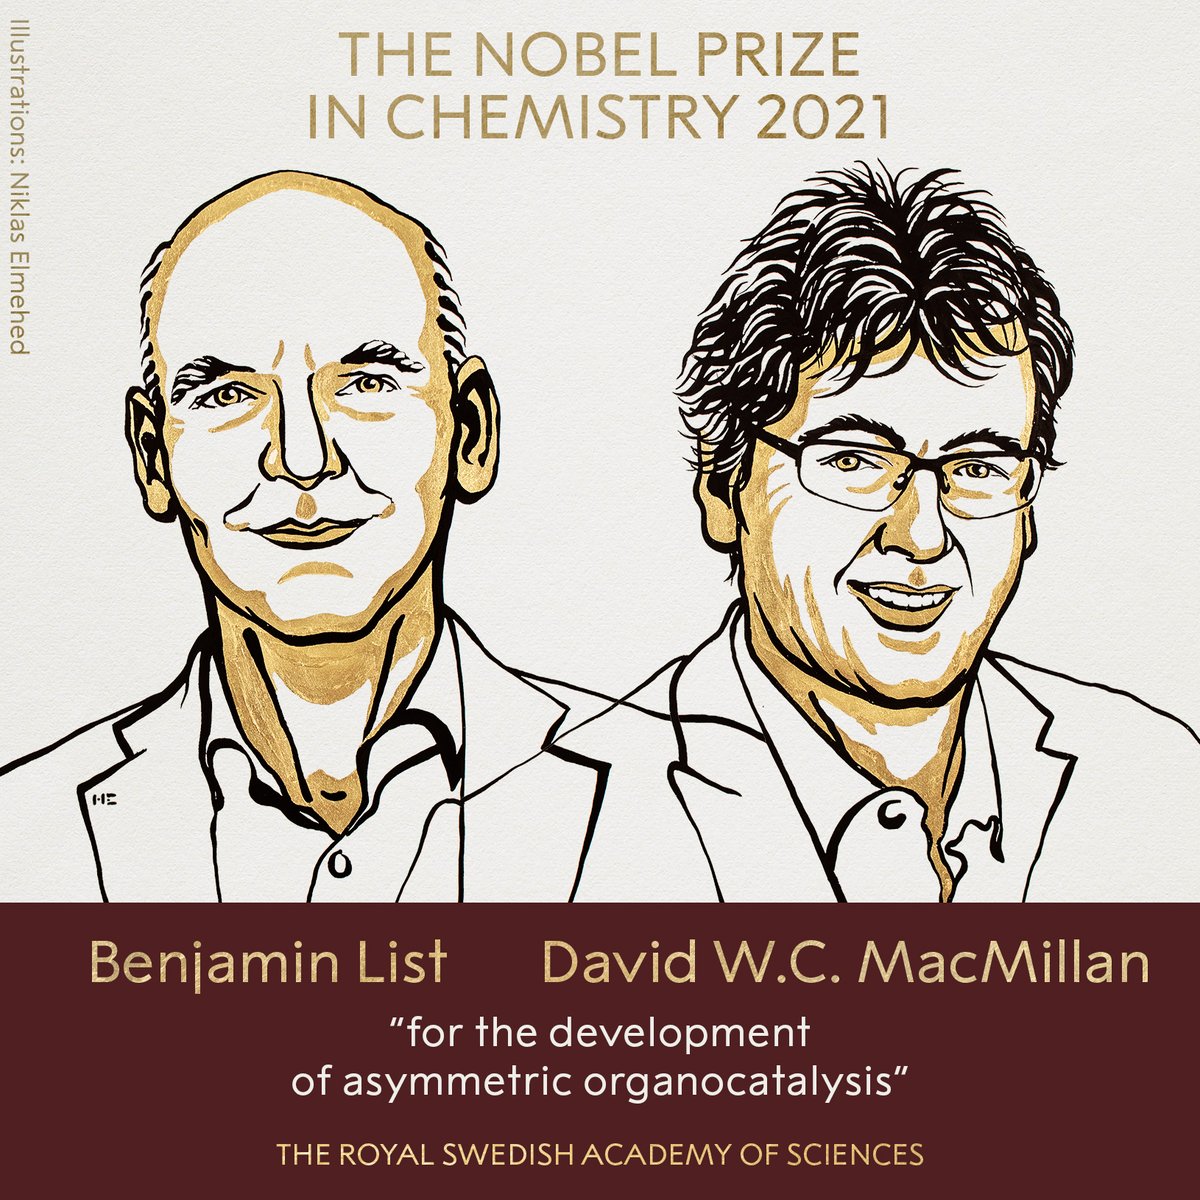 BREAKING NEWS: The 2021 #NobelPrize in Chemistry has been awarded to Benjamin List and David W.C. MacMillan “for the development of asymmetric organocatalysis.”